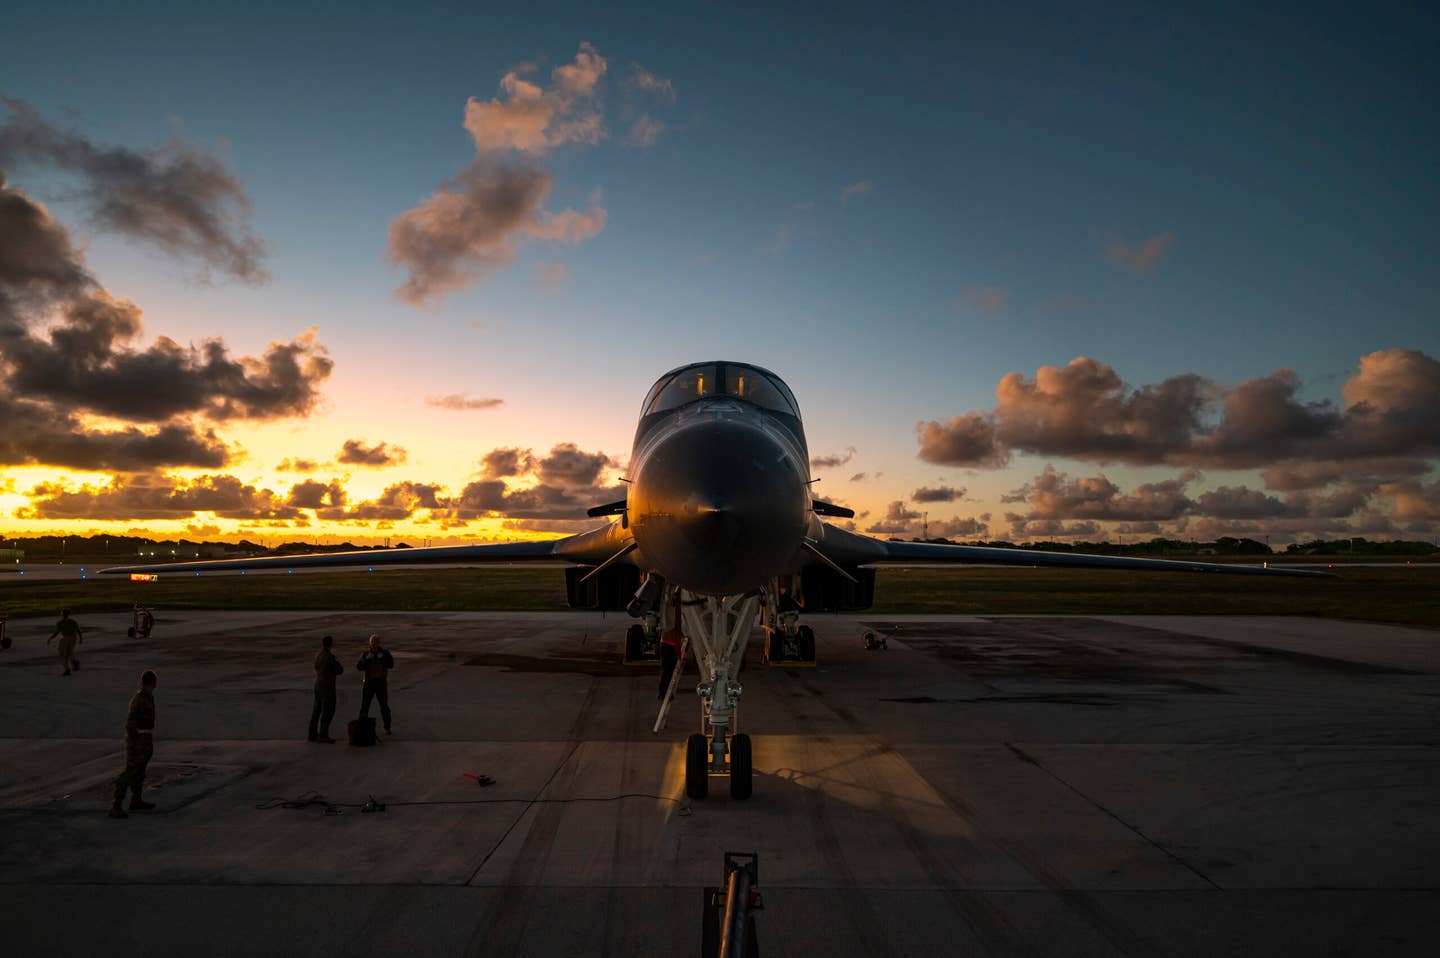 Airmen assigned to the 28th Aircraft Maintenance Squadron, Ellsworth Air Force Base, perform a post-flight inspection on a B-1B at Andersen Air Force Base, after participating in a Bomber Task Force integration mission, June 6, 2022. <em>U.S. Air Force photo by Master Sgt. Nicholas Priest</em>